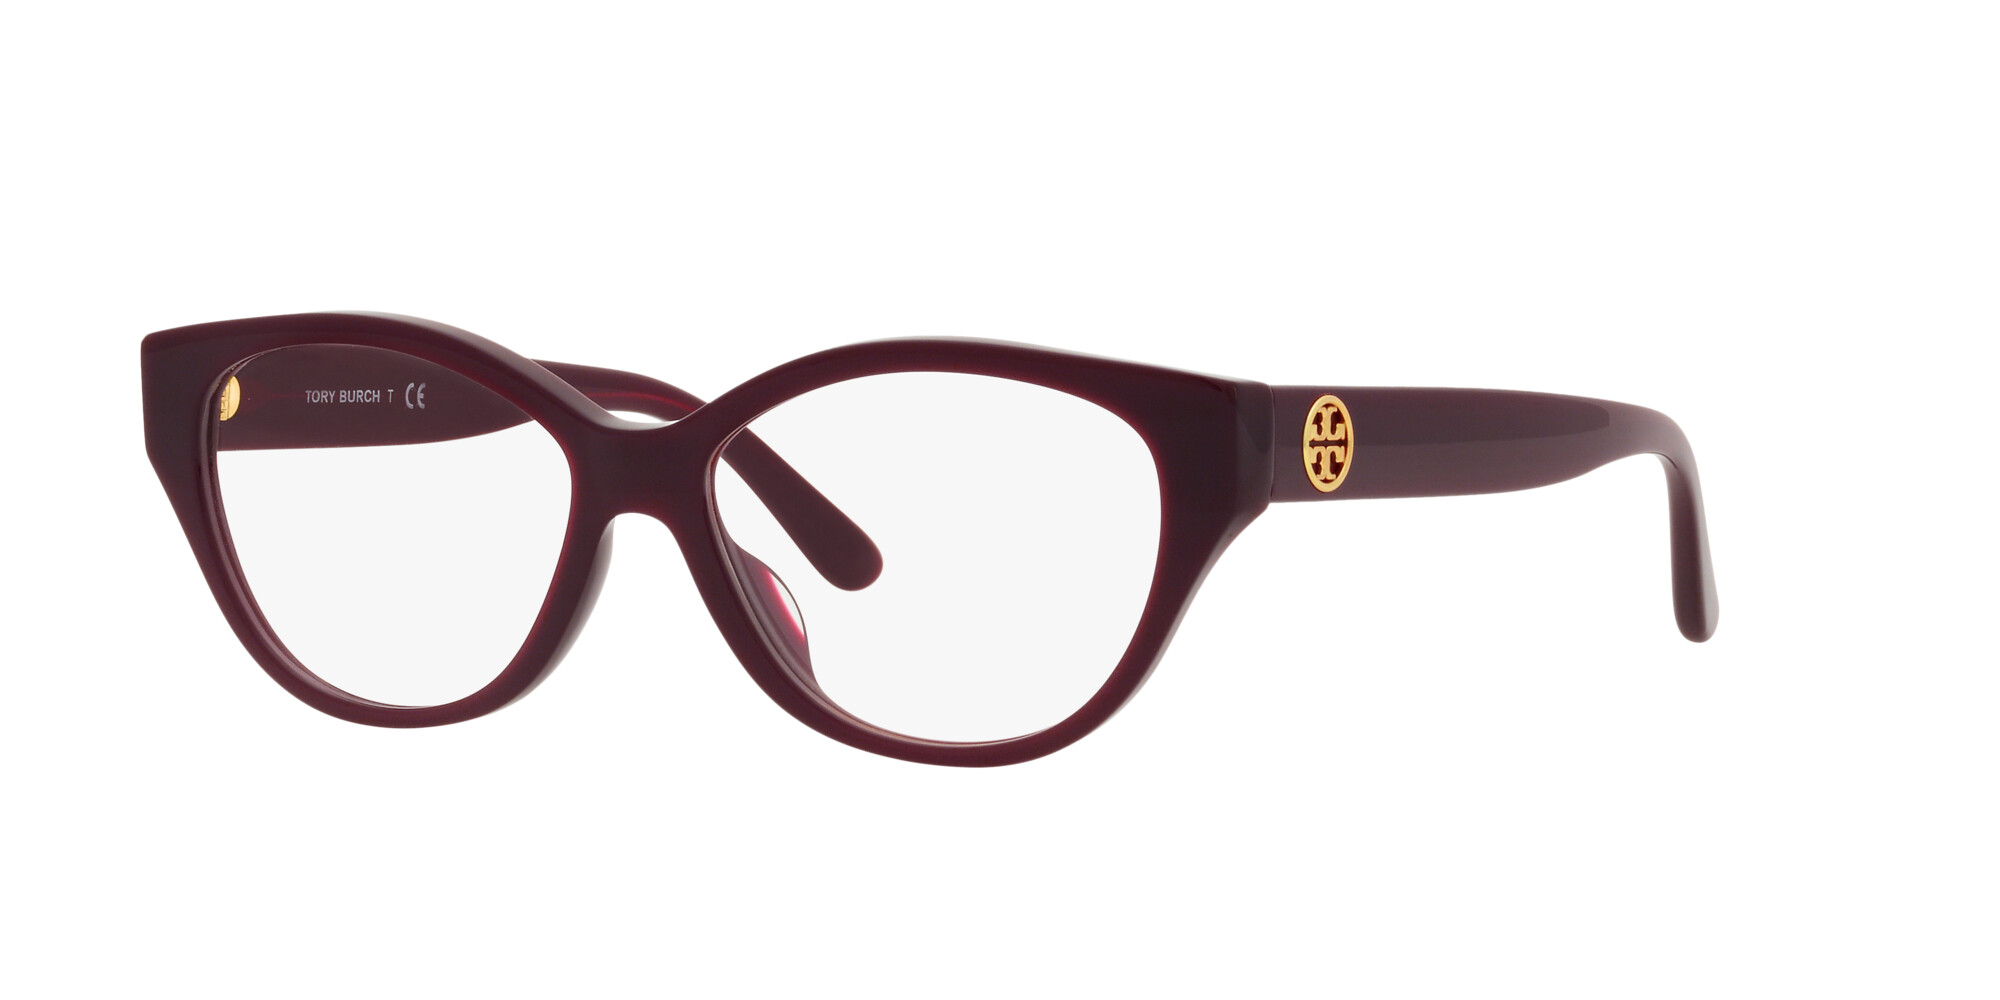 Angle_Left01 Tory Burch 0TY2123U 1892 Brille Dunkelrot